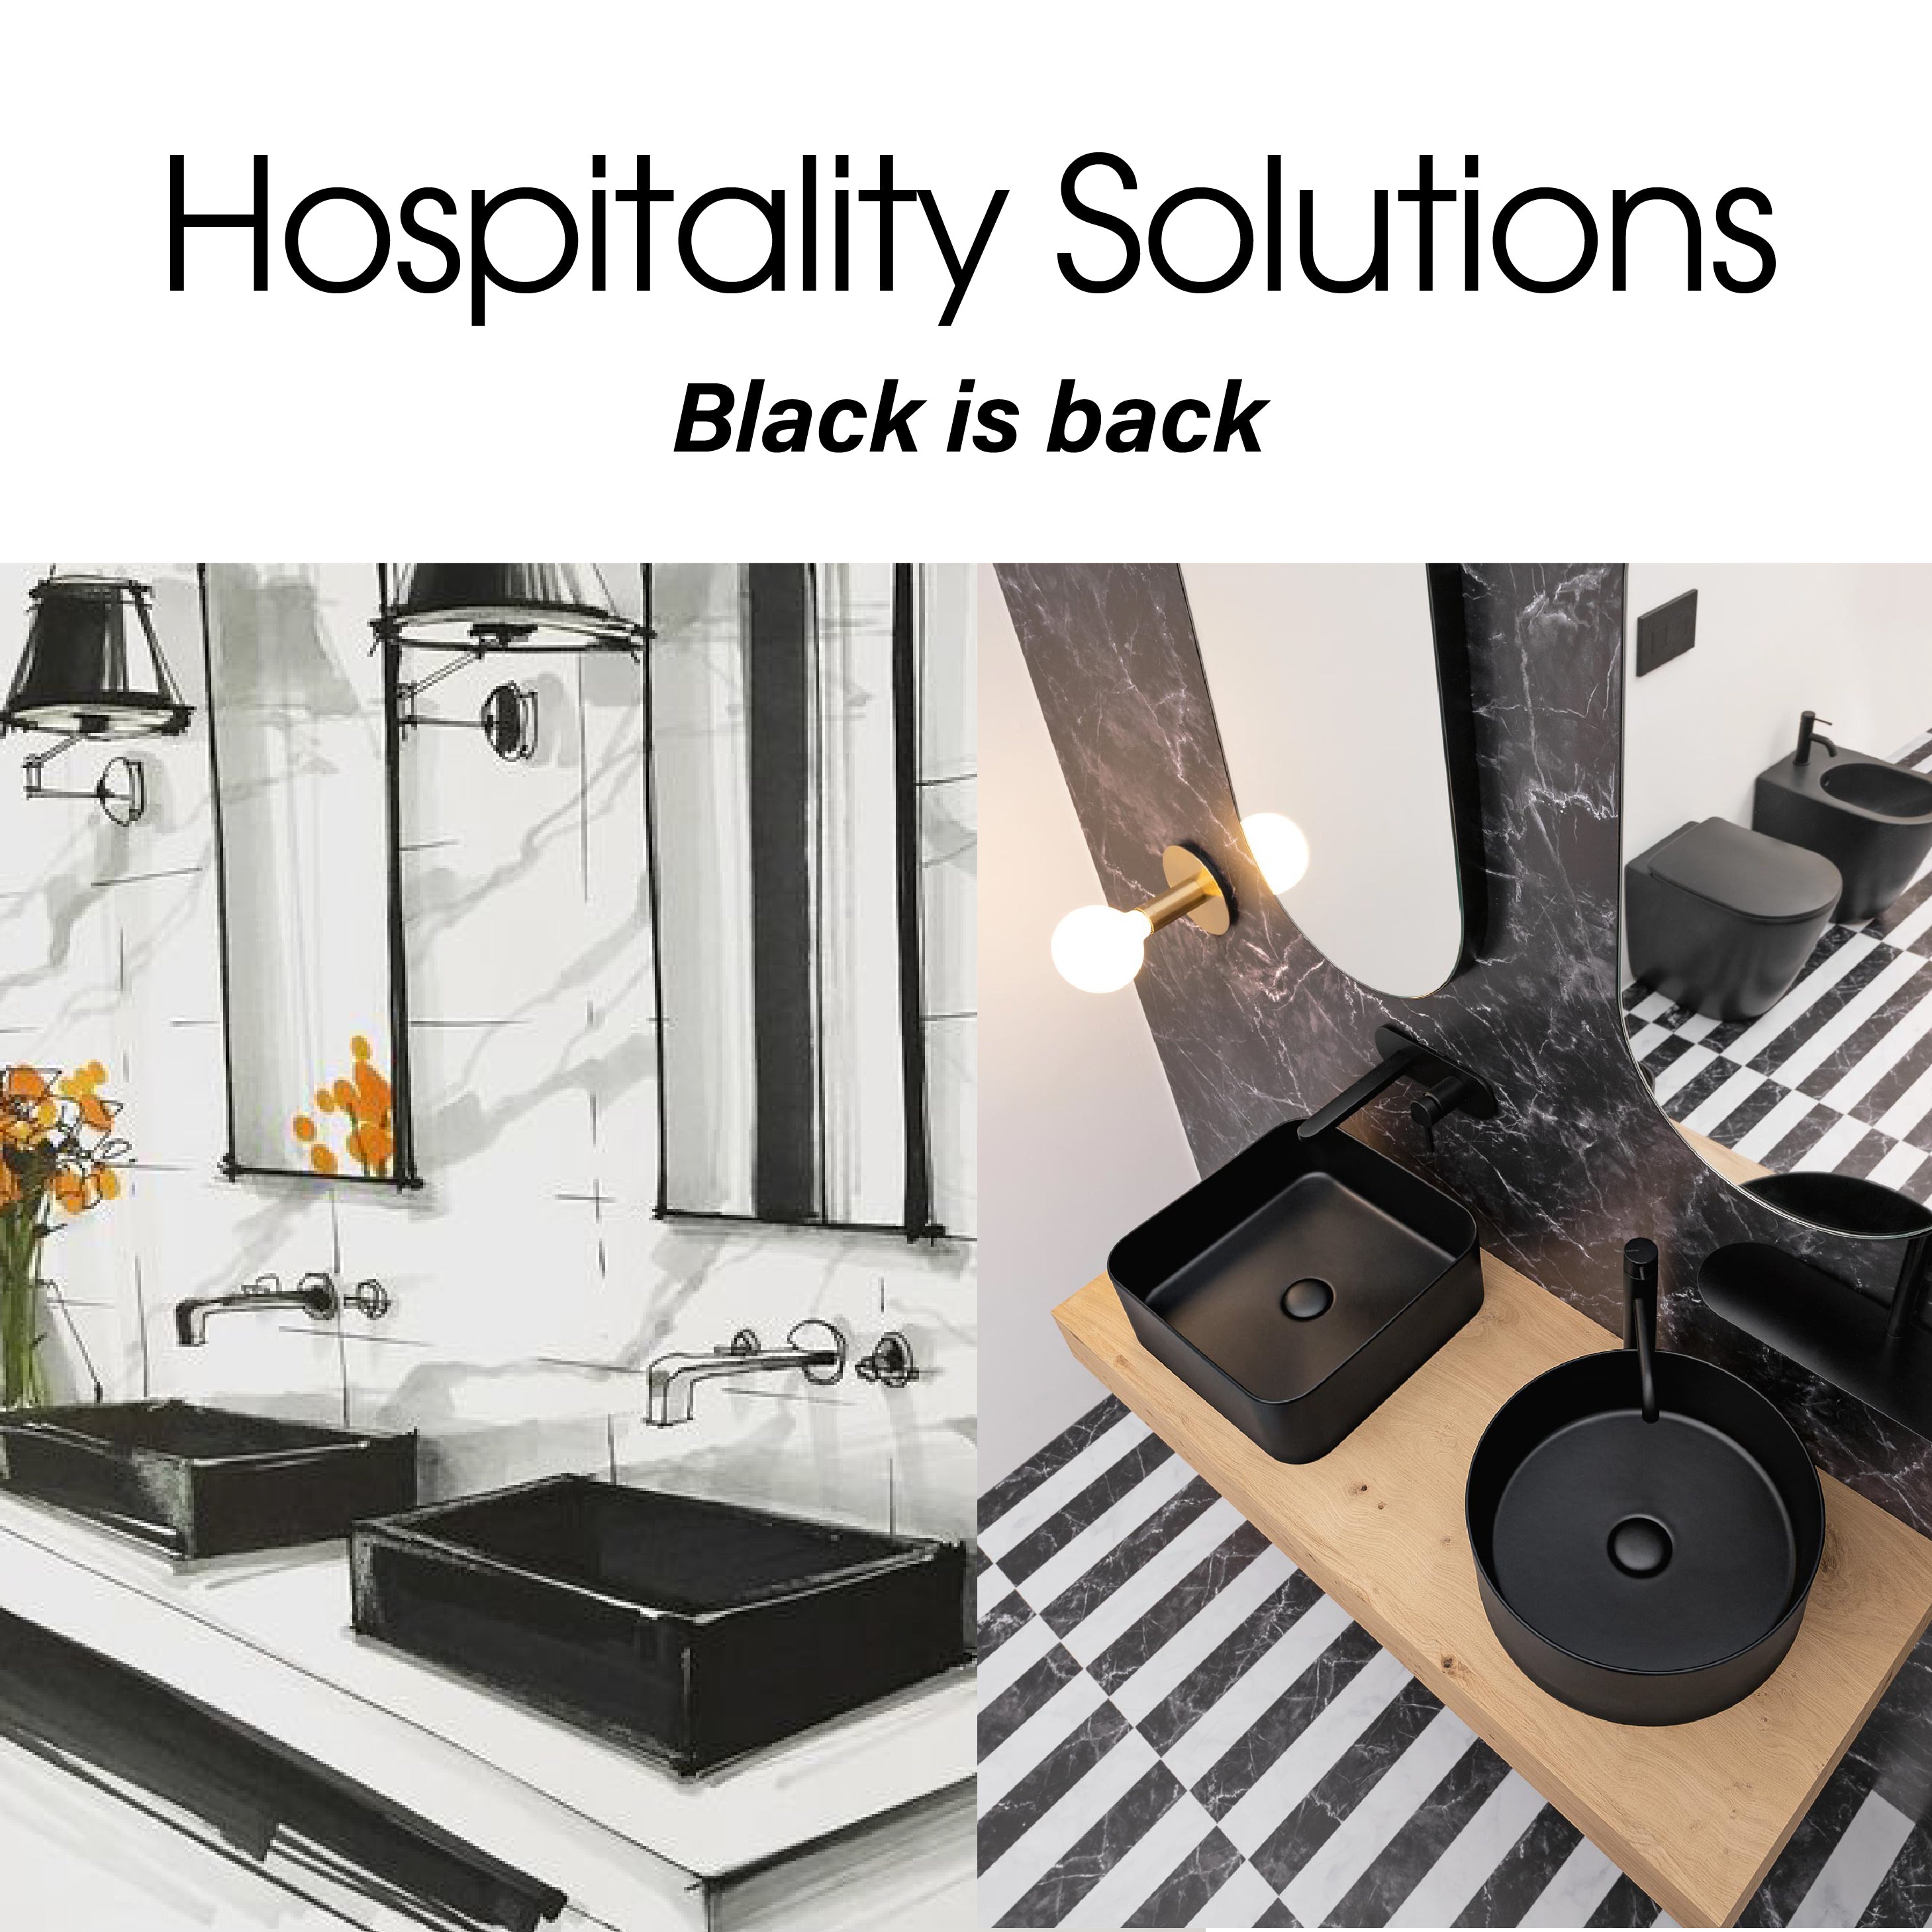 HOSPITALITY SOLUTIONS | BLACK IS BACK